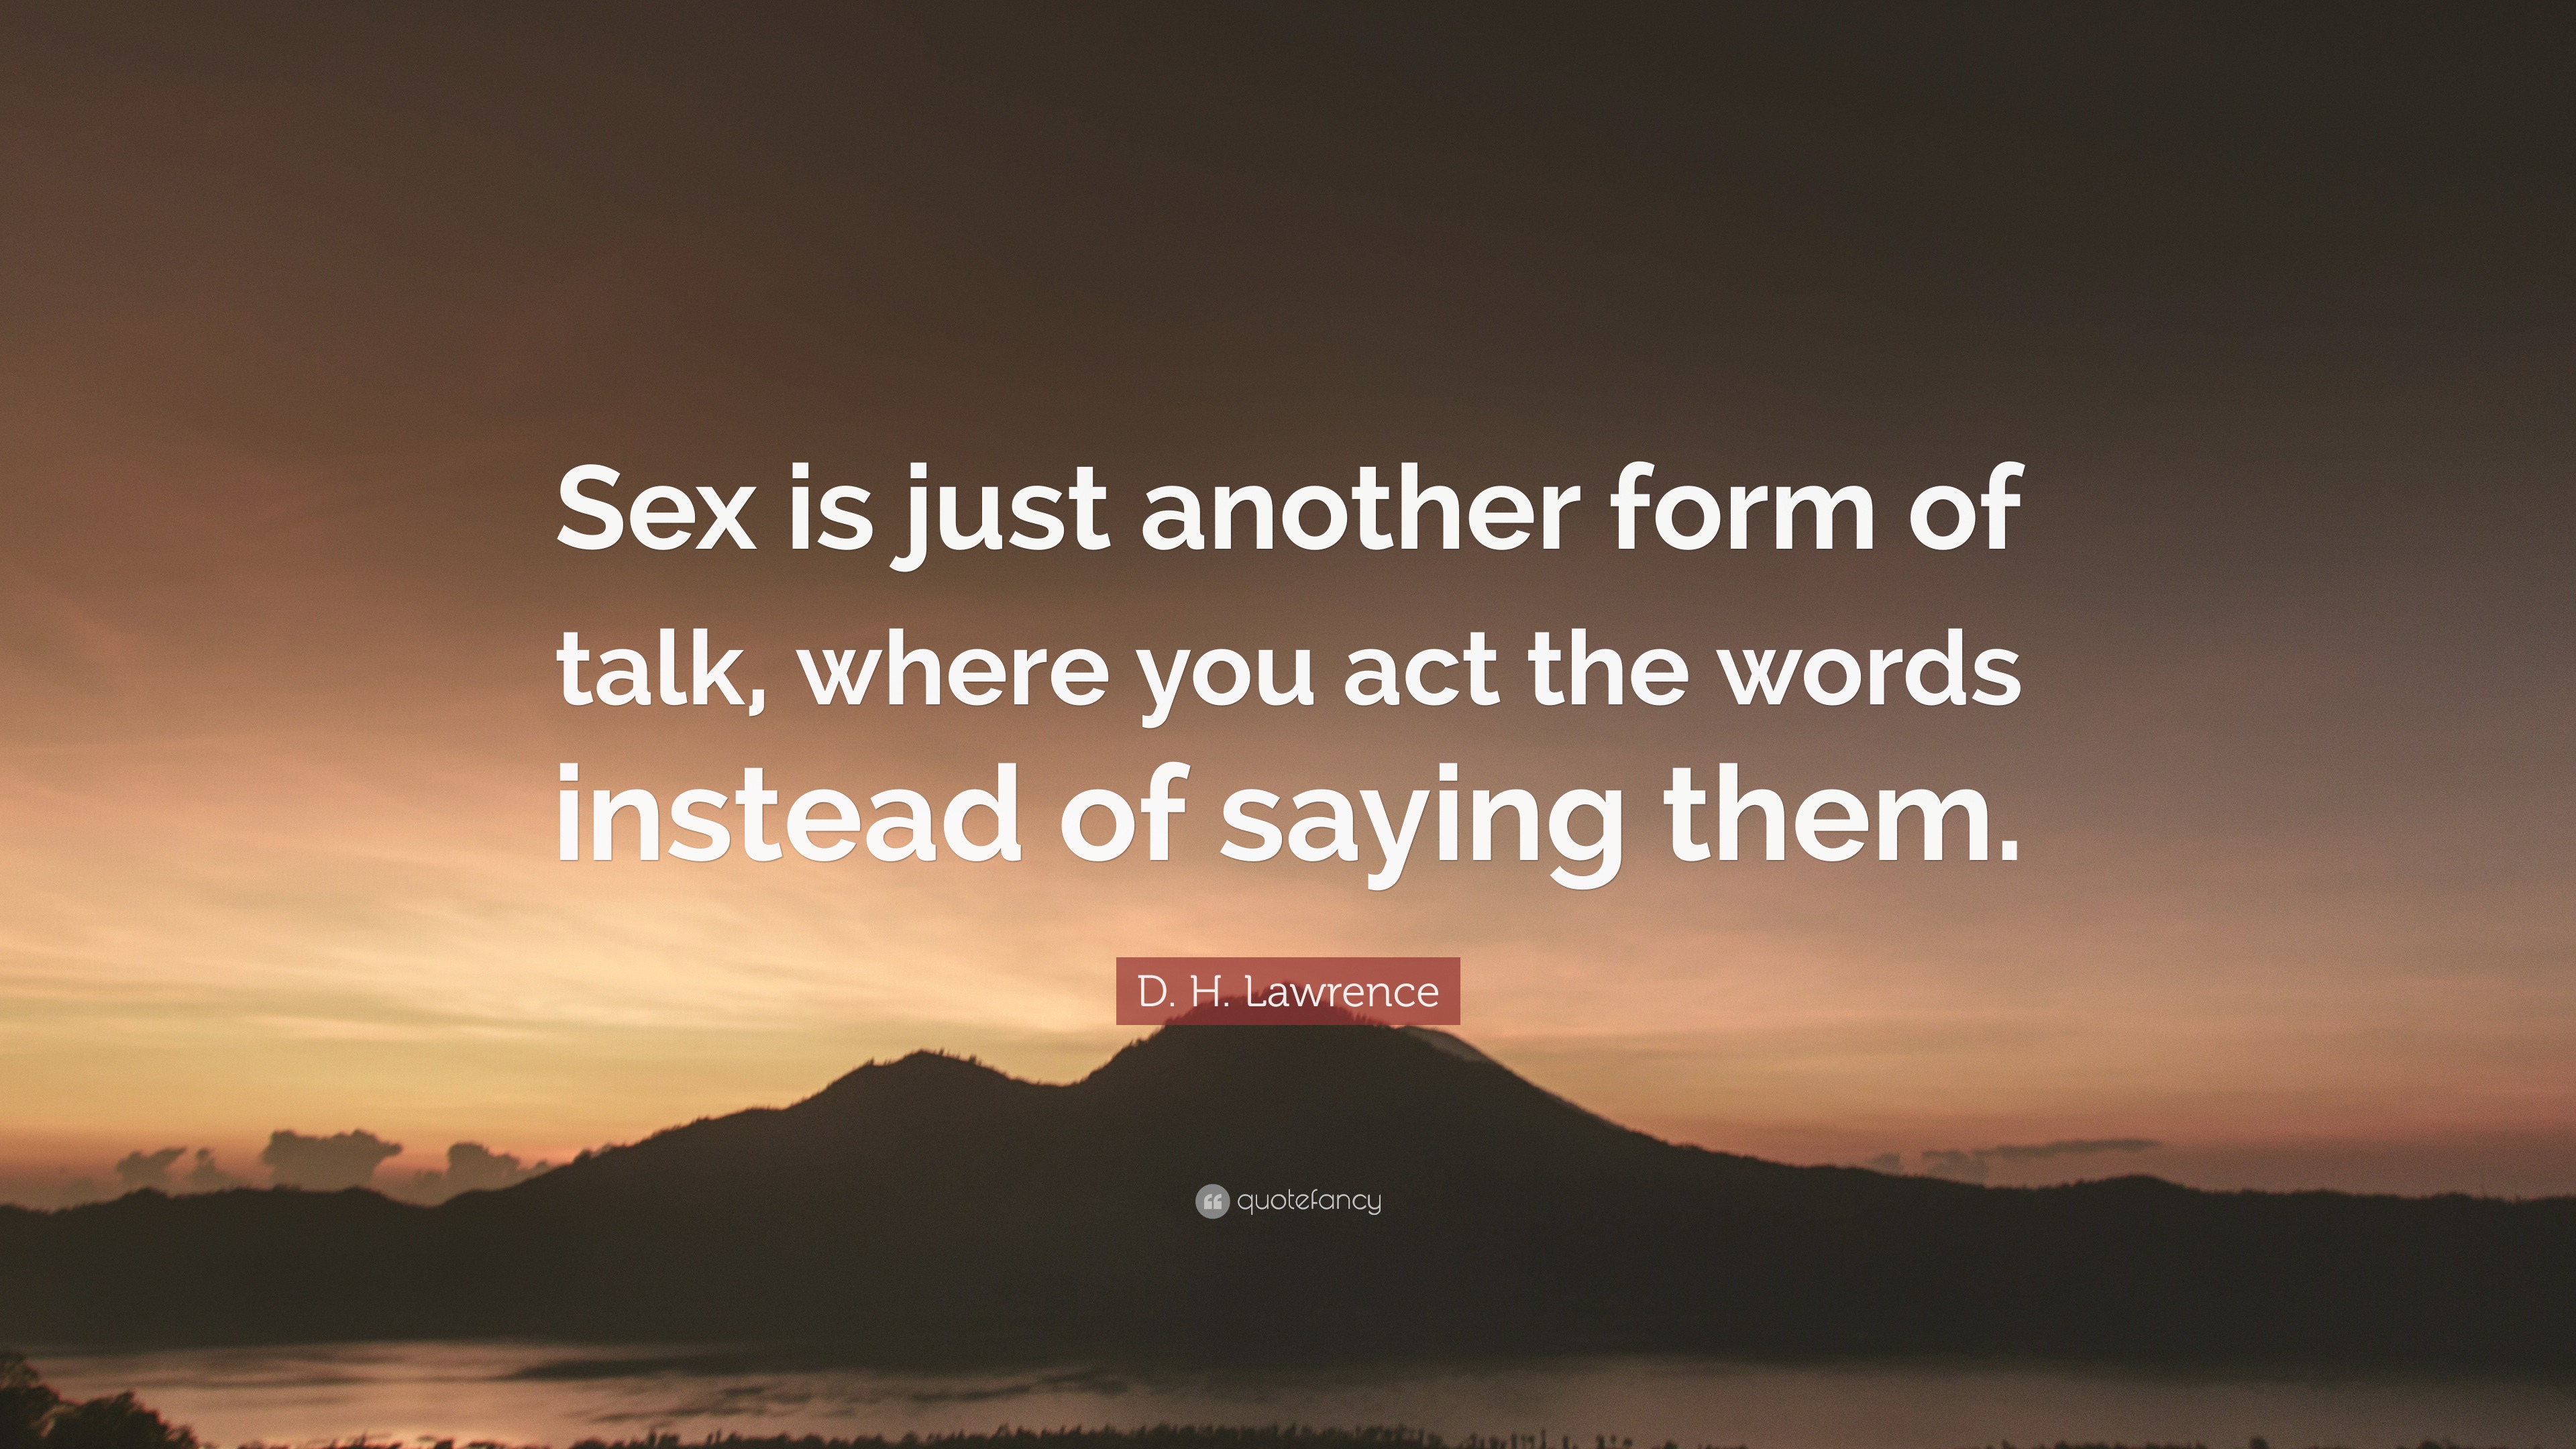 D. H. Lawrence Quote: “Sex is just another form of talk, where you act